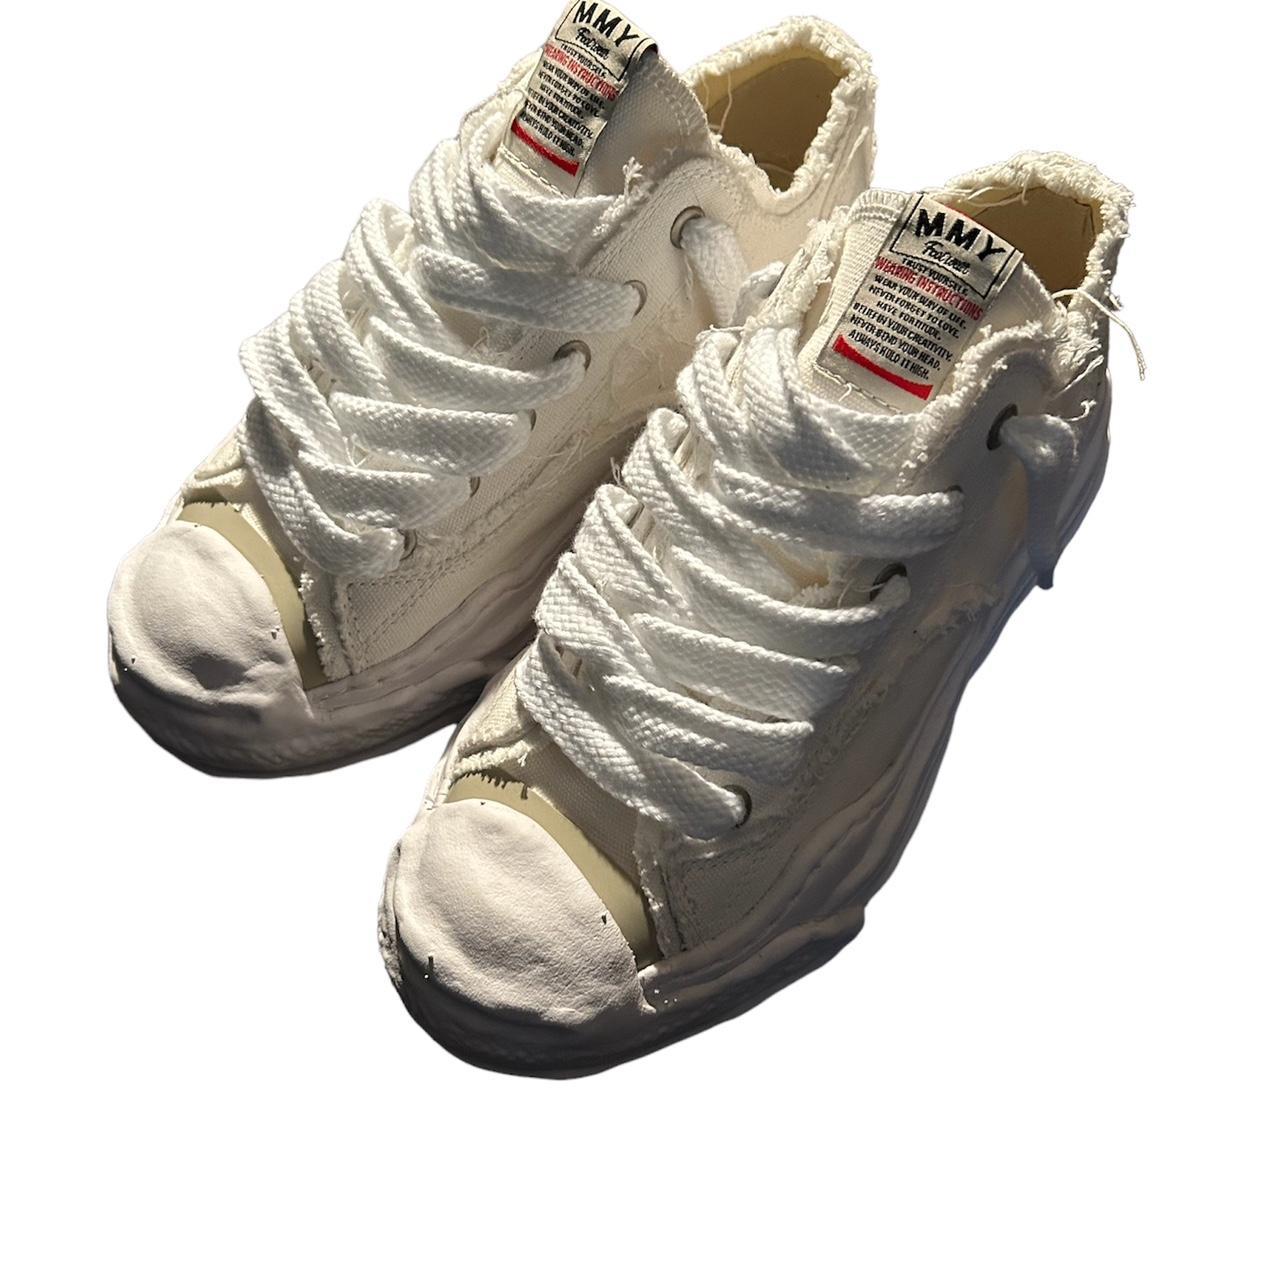 Maison Mihara (white + distressed) Size 44 (Fits a... - Depop